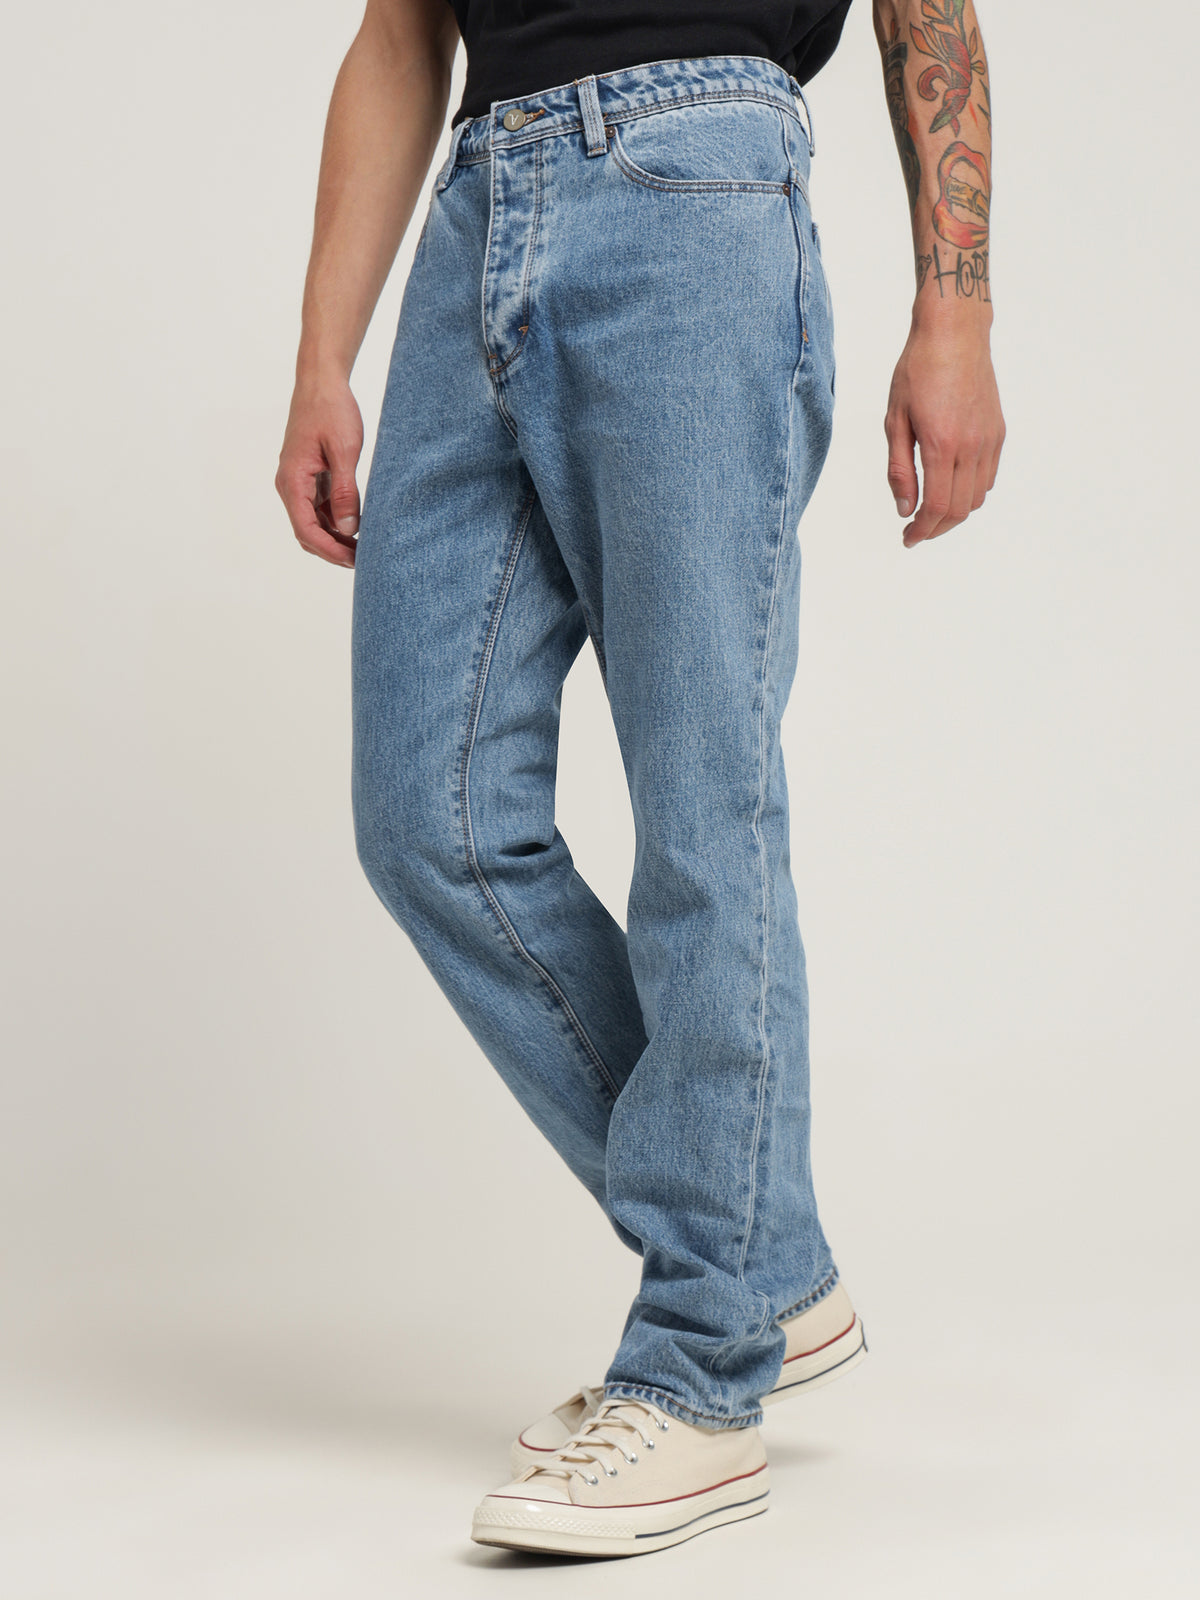 A 90s Relaxed Jeans in Death Disco Blue